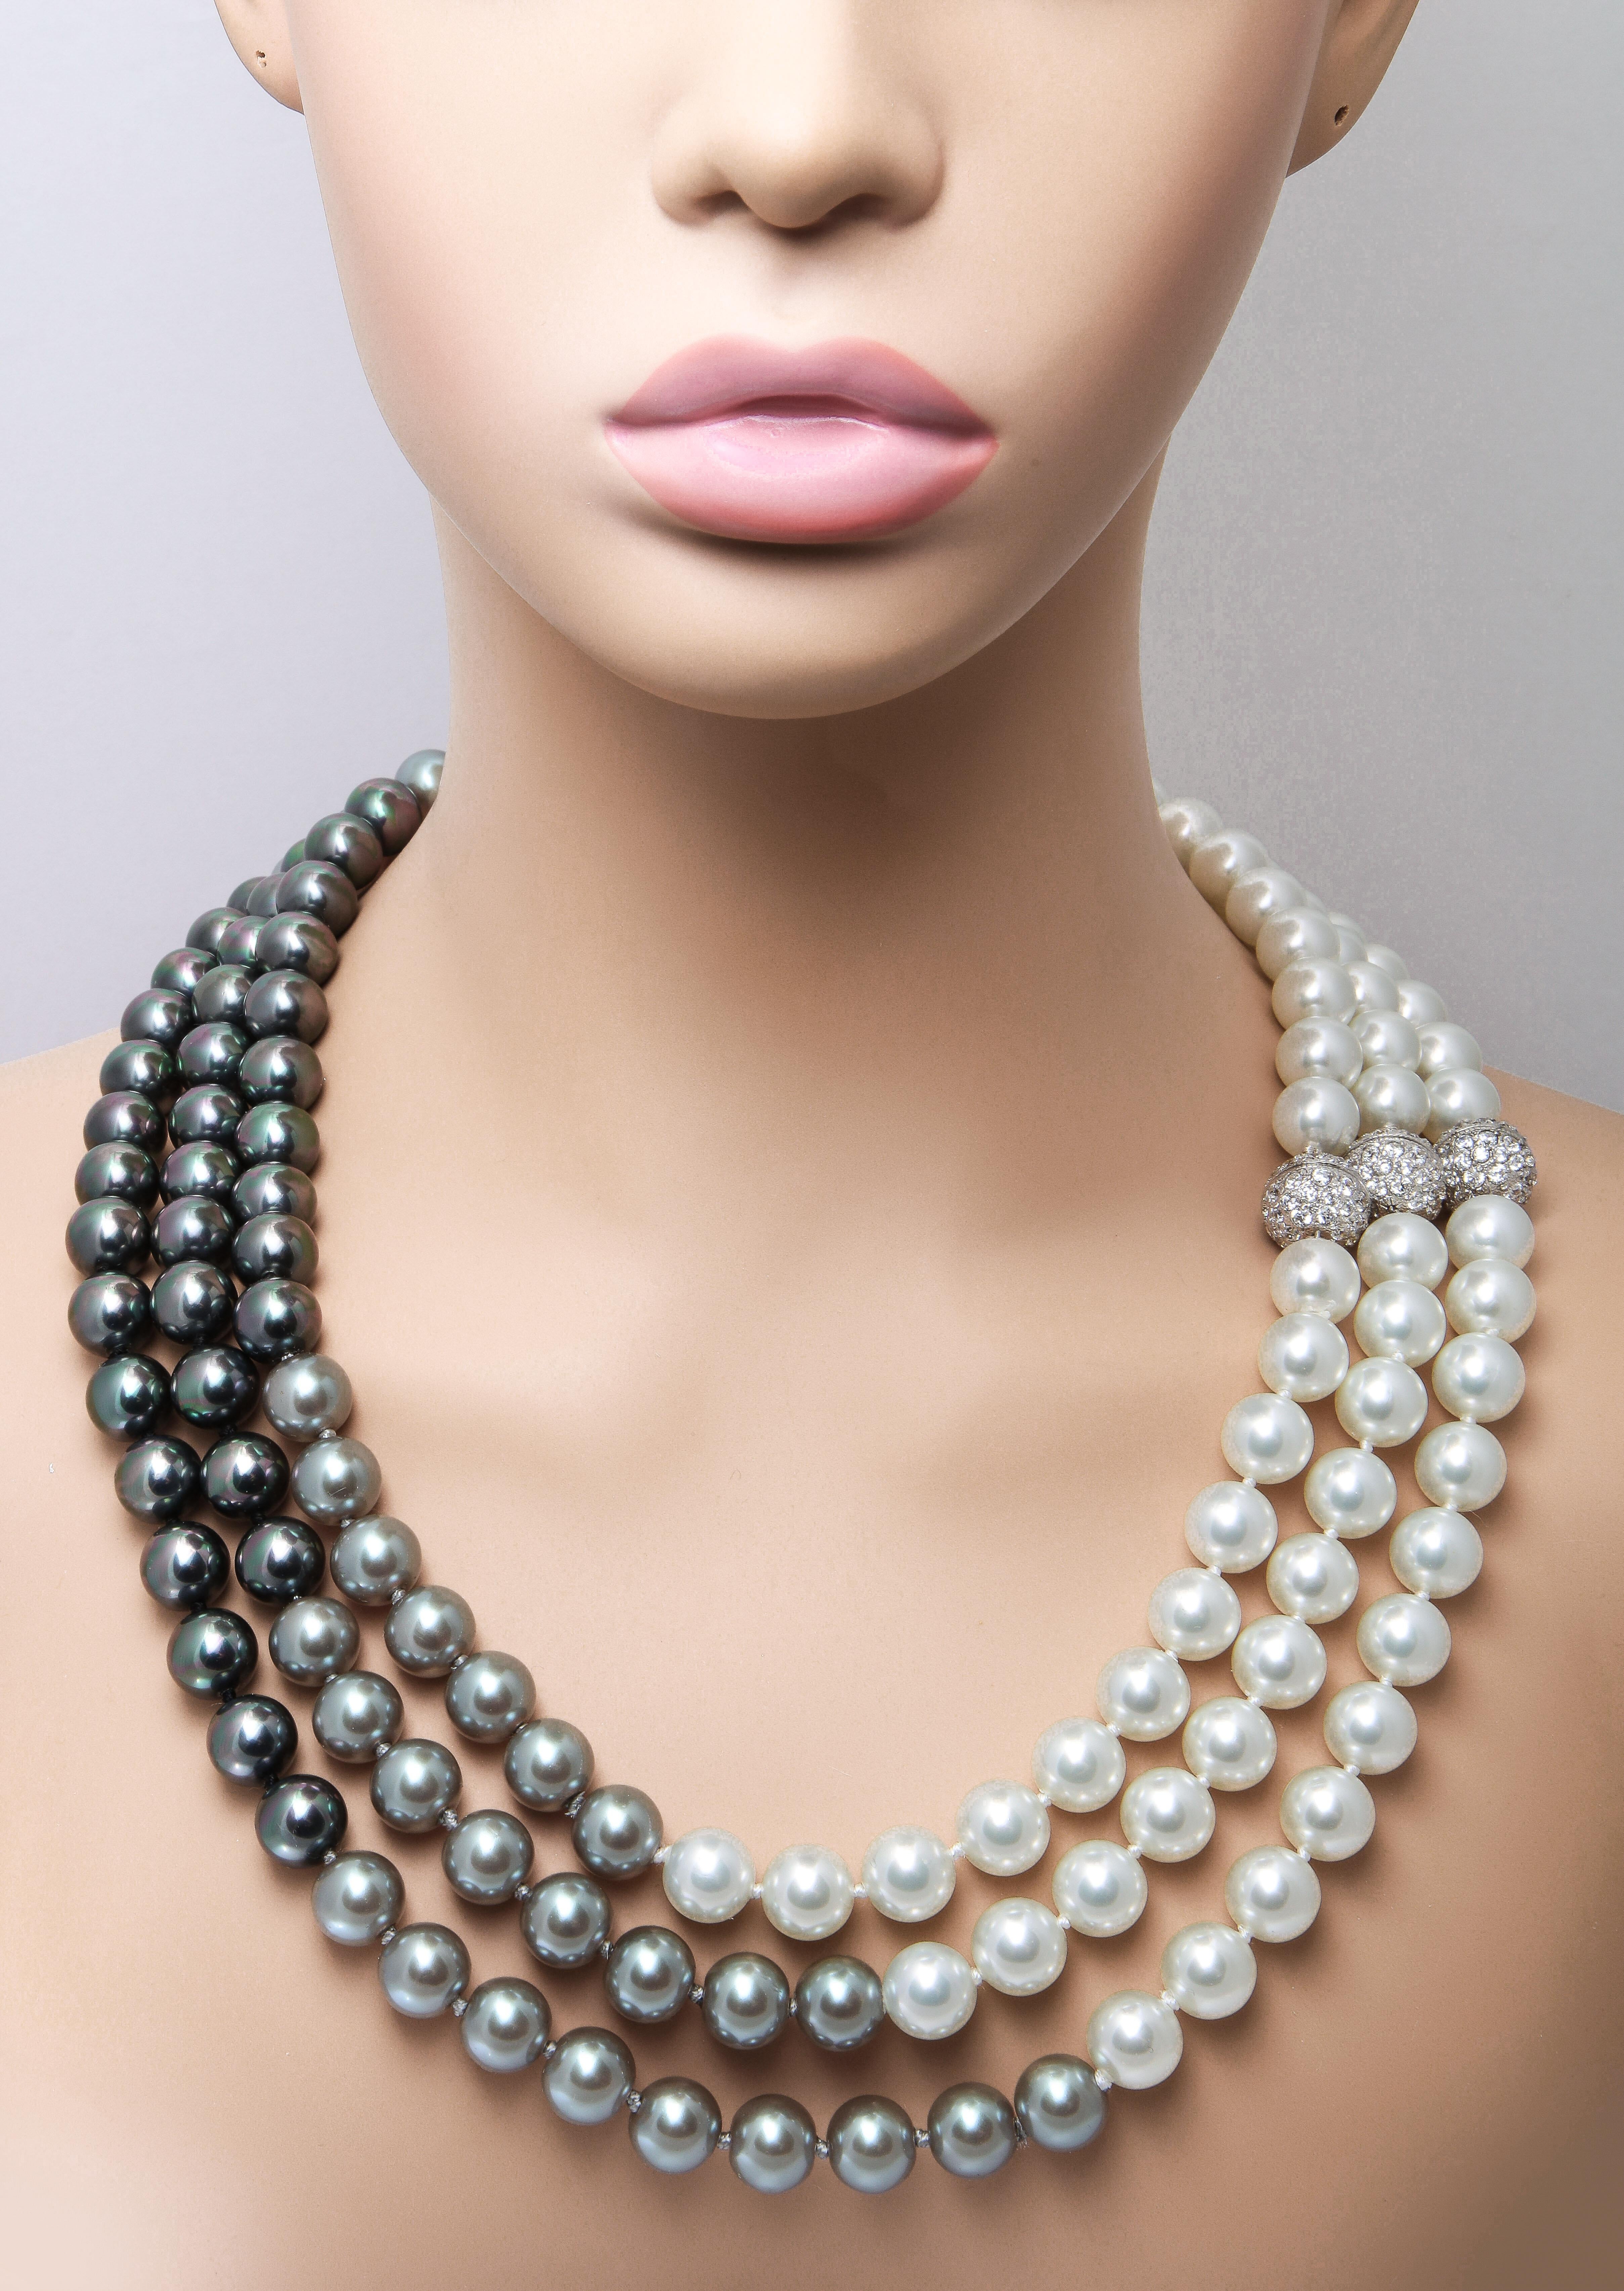  Shaded South Sea Manmade Pearls  Separable Three Necklaces Mikimoto Style For Sale 2